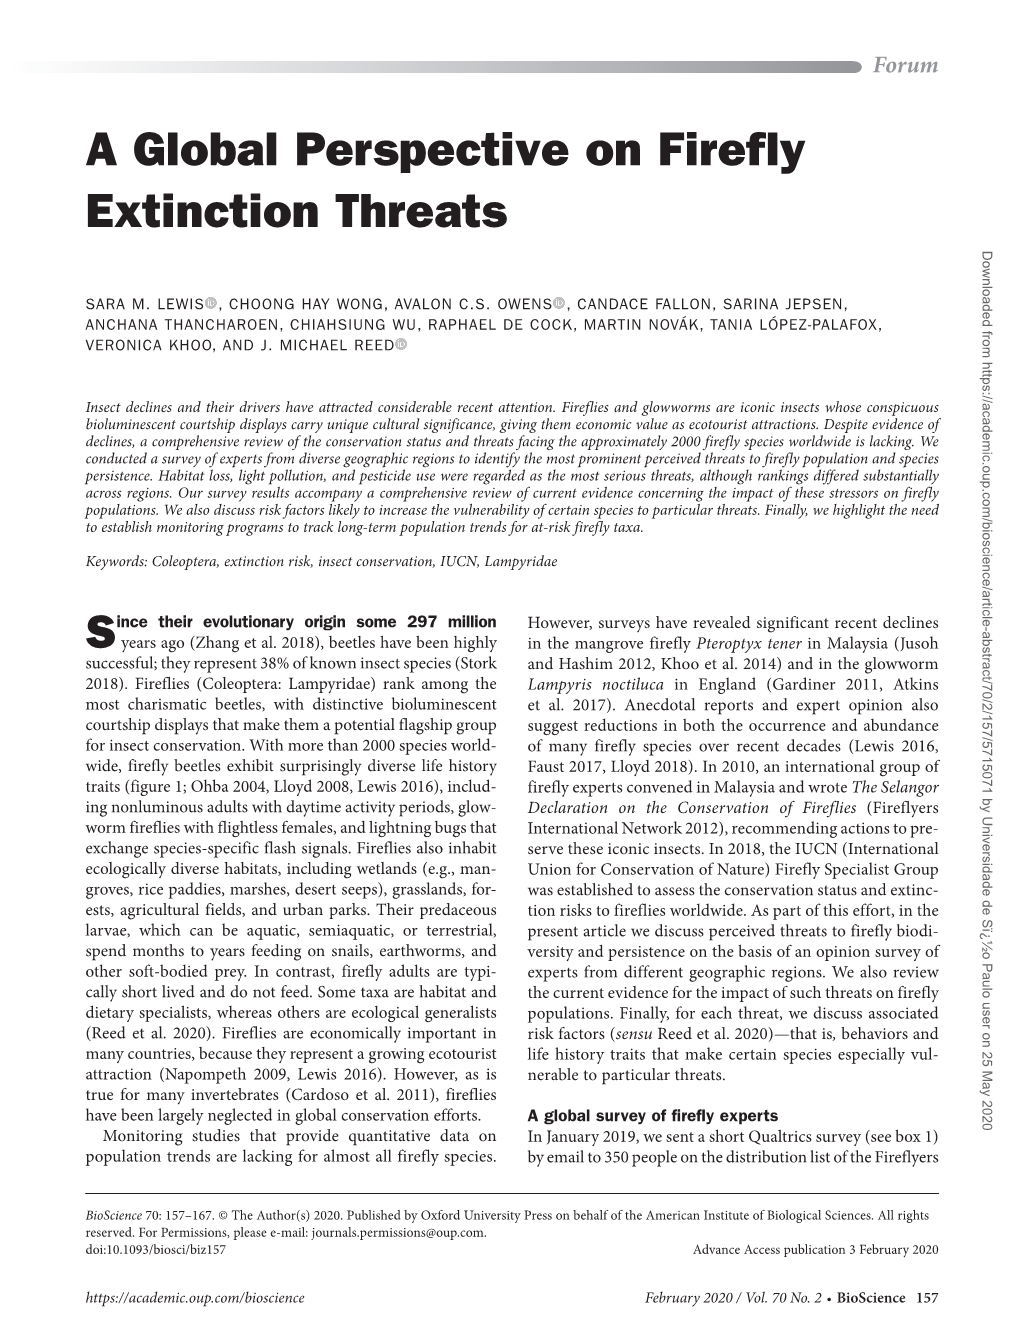 A Global Perspective on Firefly Extinction Threats